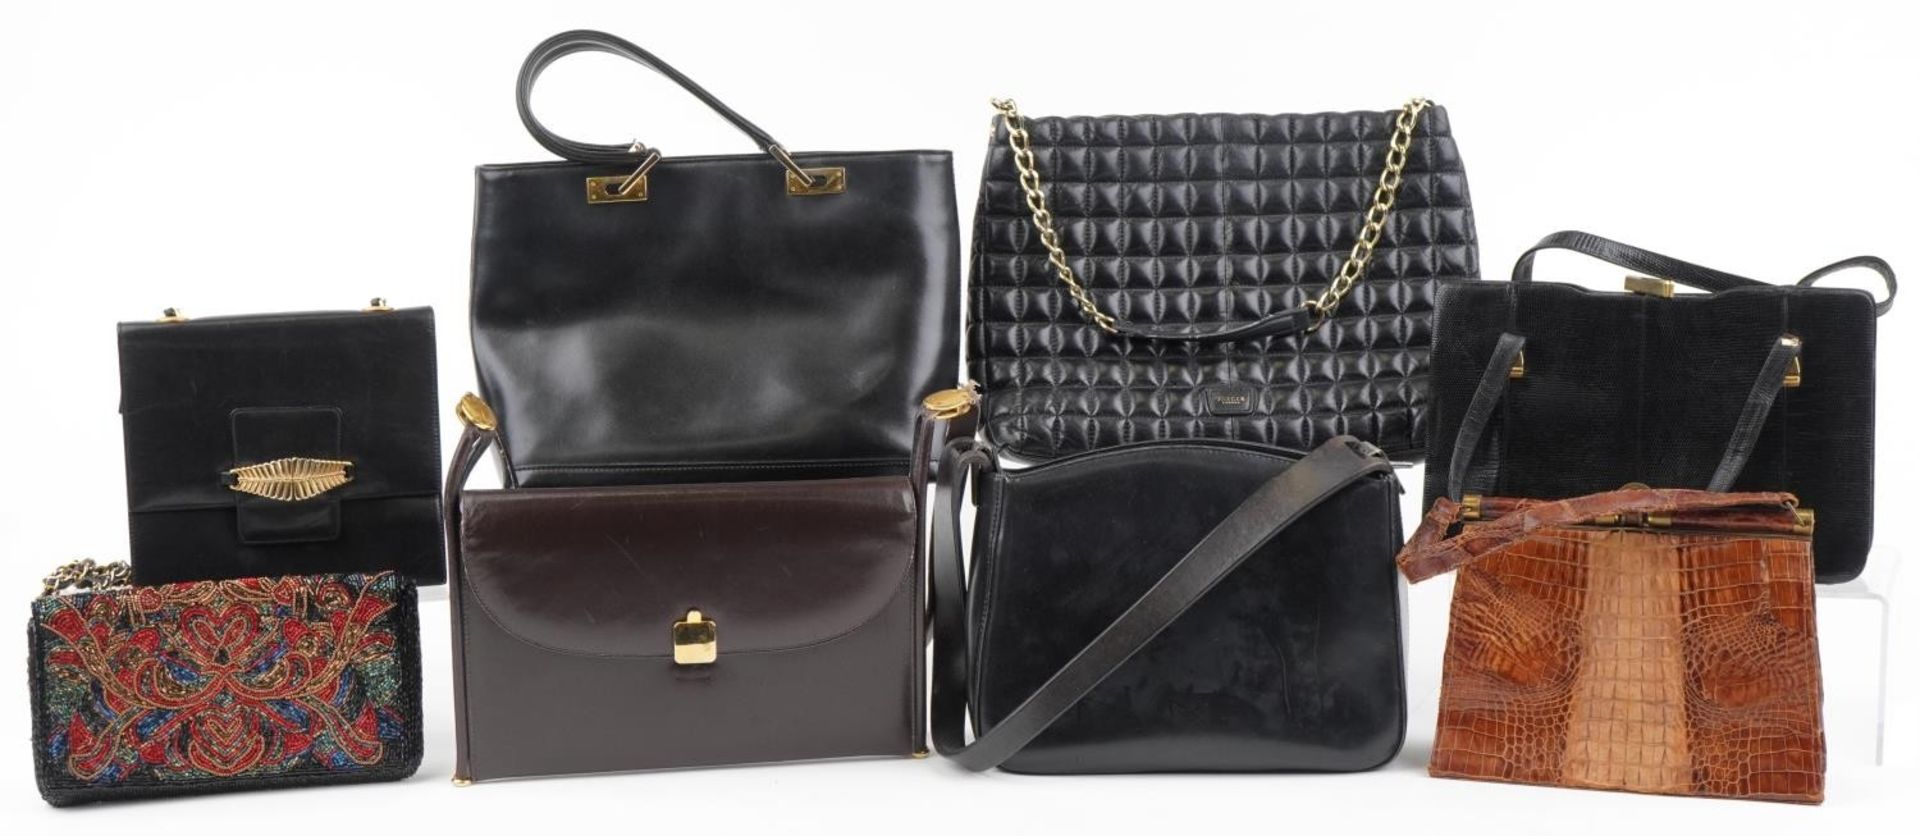 Eight vintage ladies handbags, some Italian, including Jaeger and taxidermy interest crocodile : For